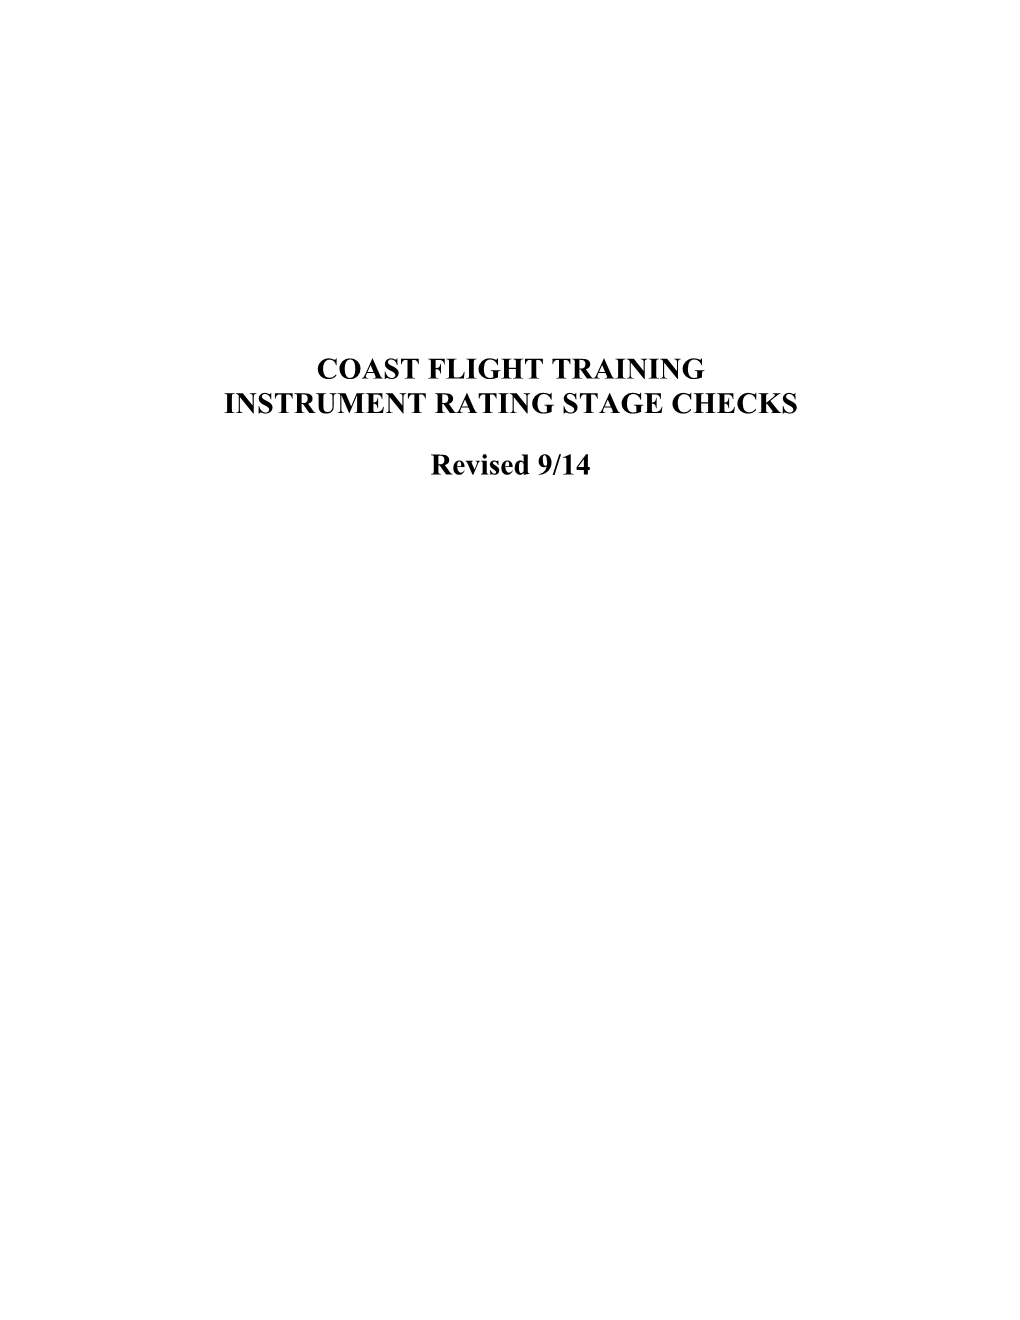 Instrument Rating Stage Checks